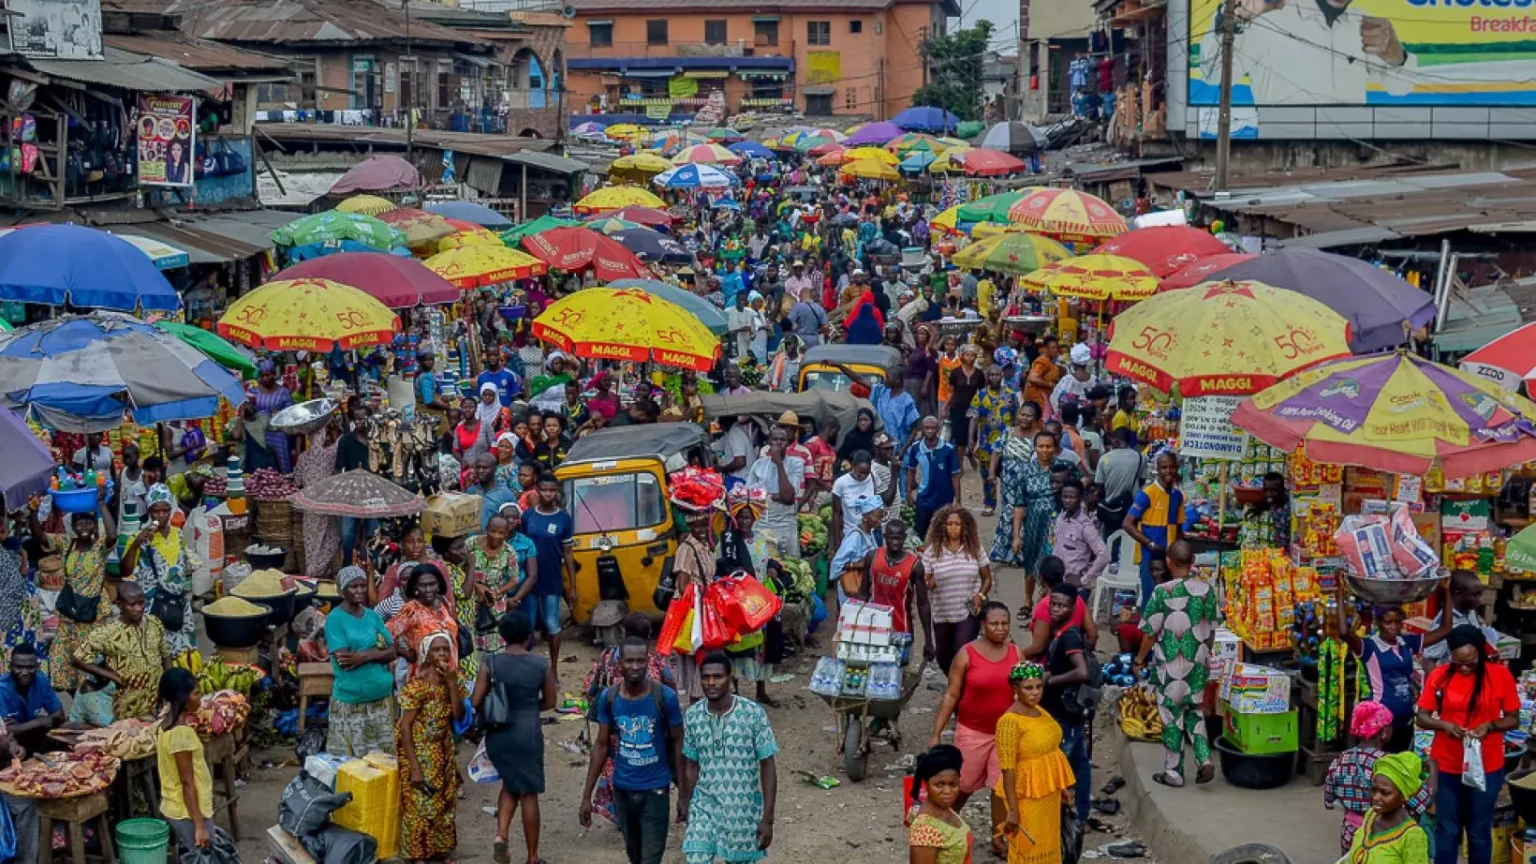 Lagos Traders Rejecting Bank Transfers Amid Cash Scarcity: Challenges and Solutions